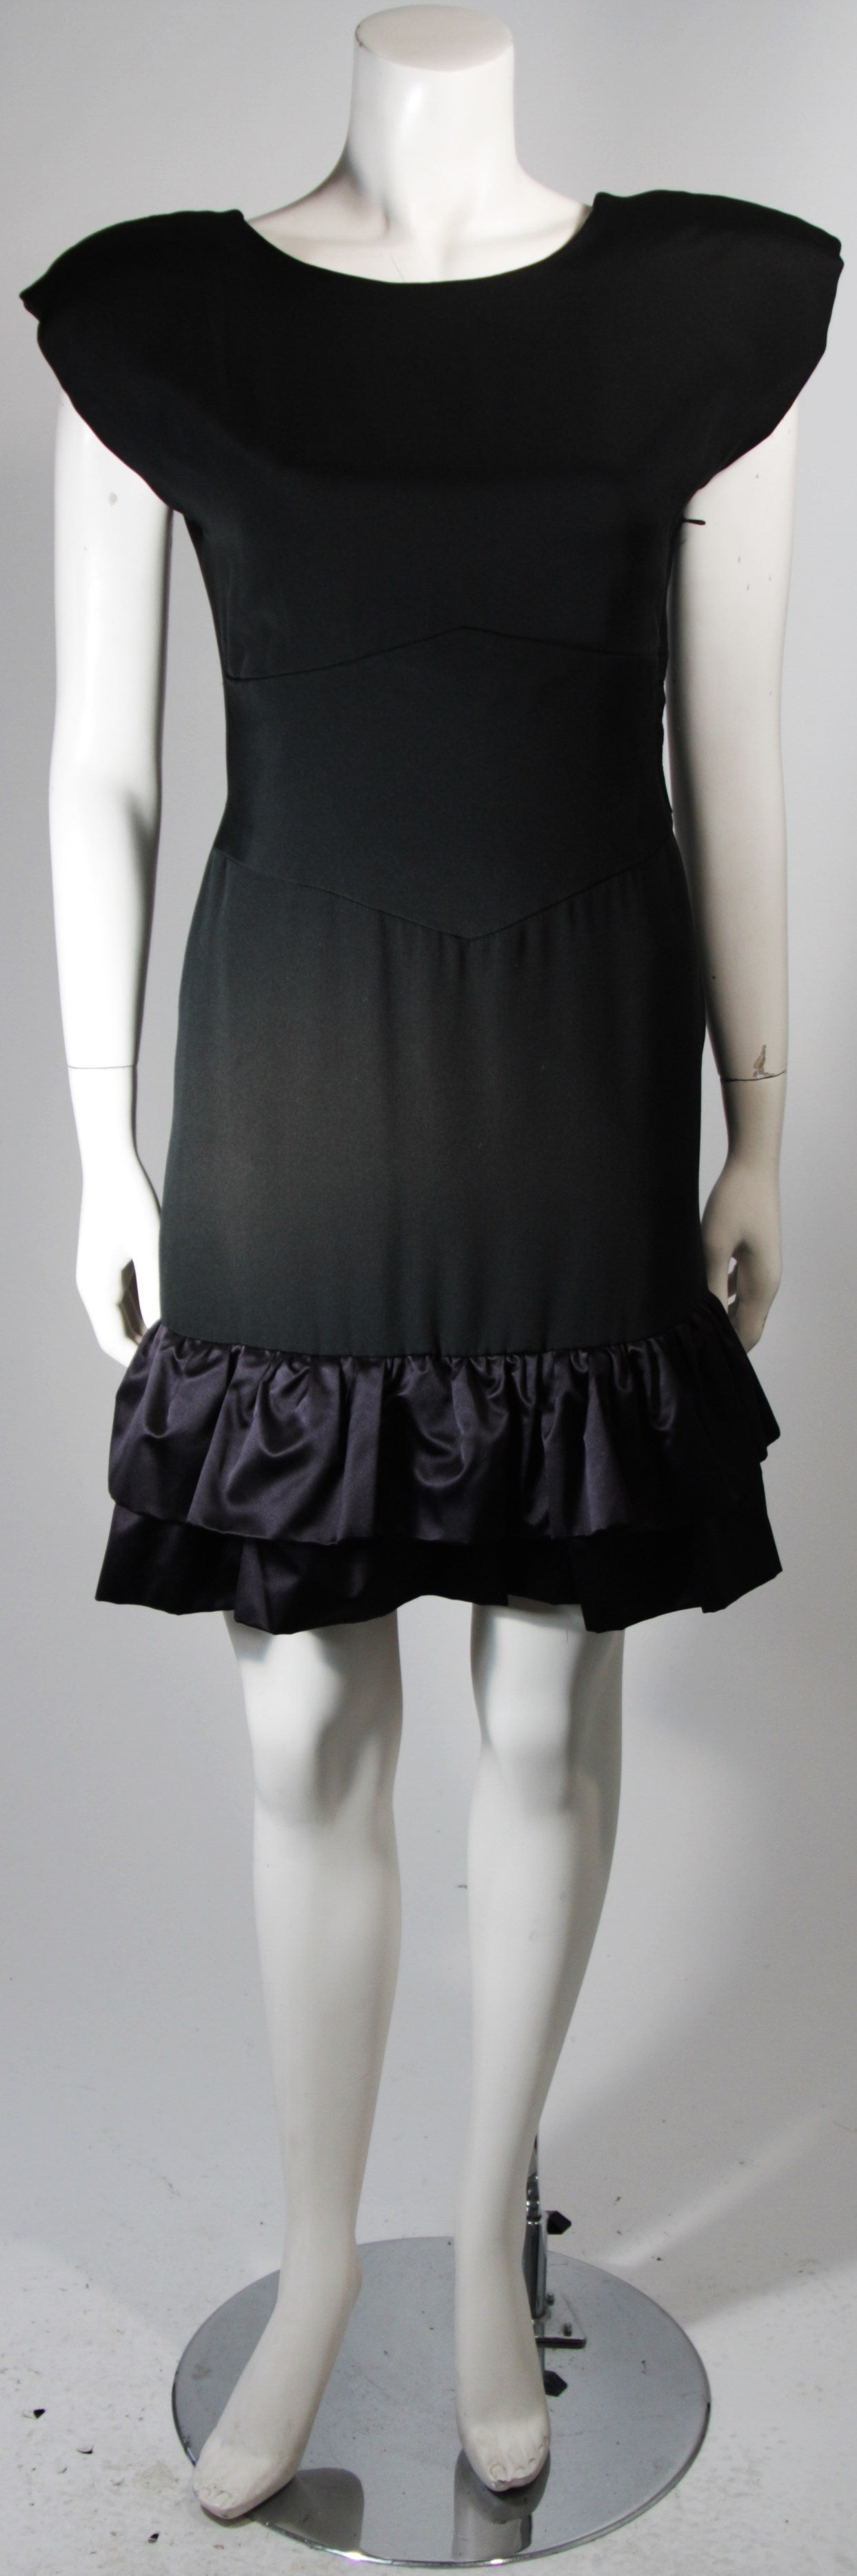 This Vicky Tiel dress is composed of a black silk and features a satin ruffled hem. There is a scoop style back with criss-cross accents and a side zipper closure for ease of access. In excellent condition. Made in France.

This item is from the